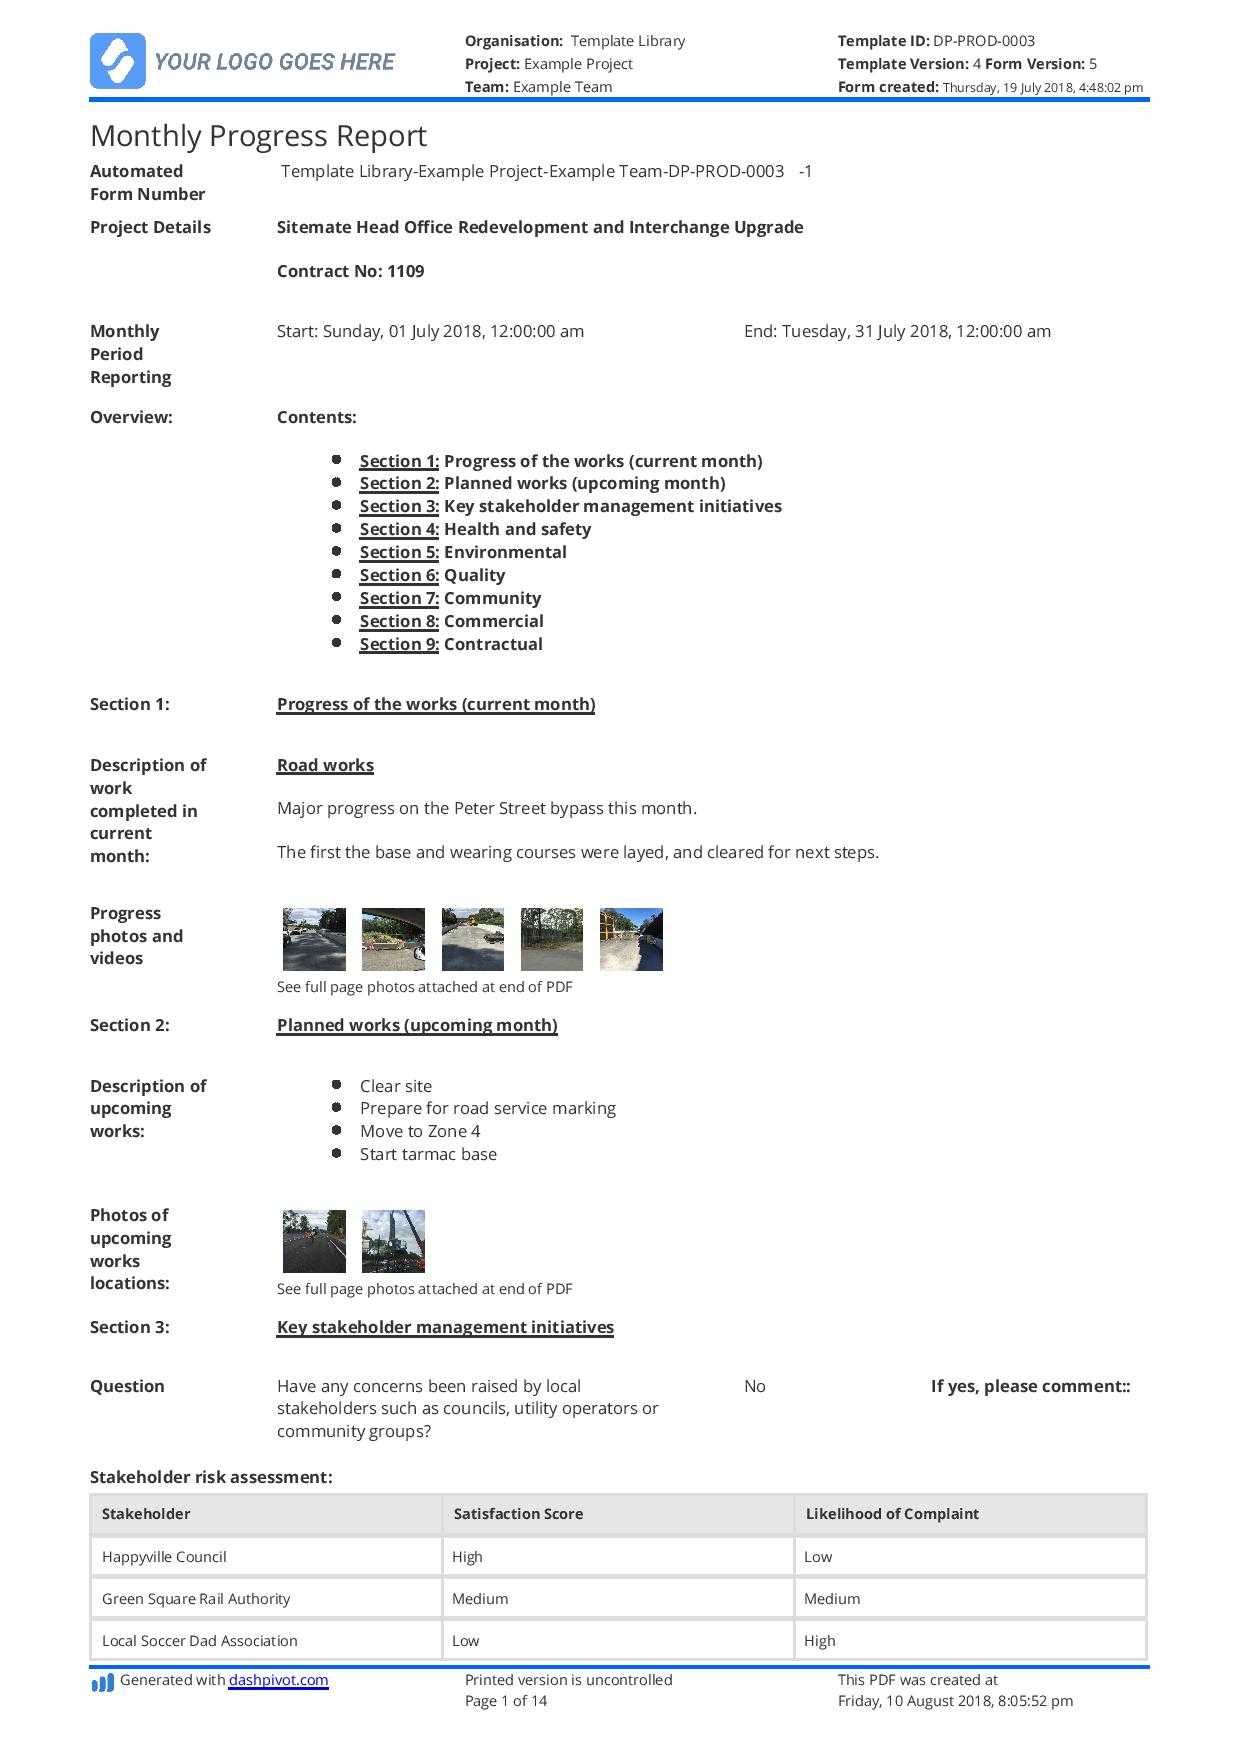 Monthly Construction Progress Report Template: Use This With Monthly Progress Report Template